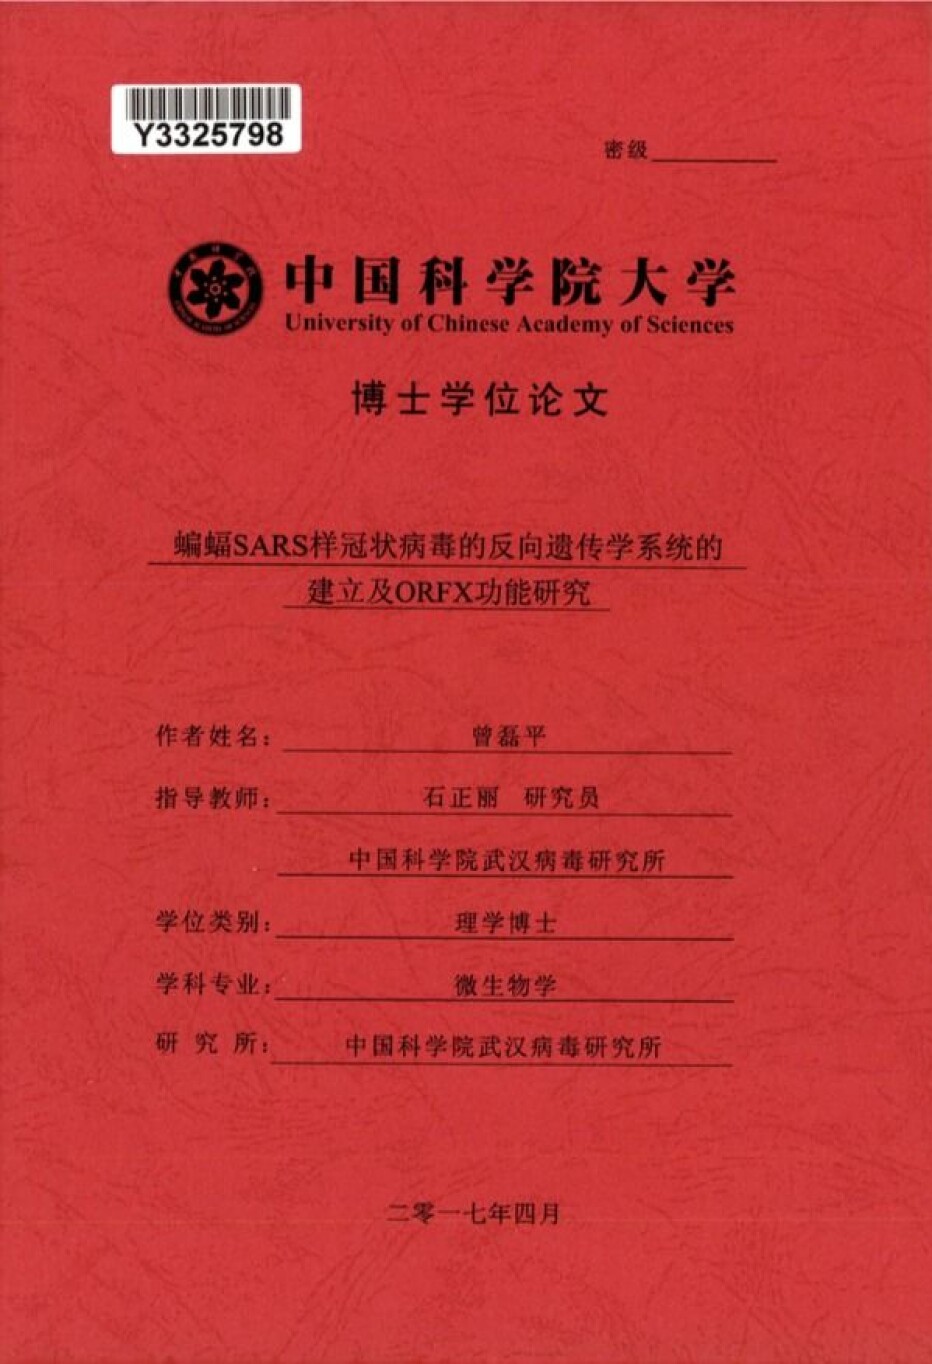 Front cover of Phd dissertation by Lei Ping Zeng at Wuhans Insitute of Viology